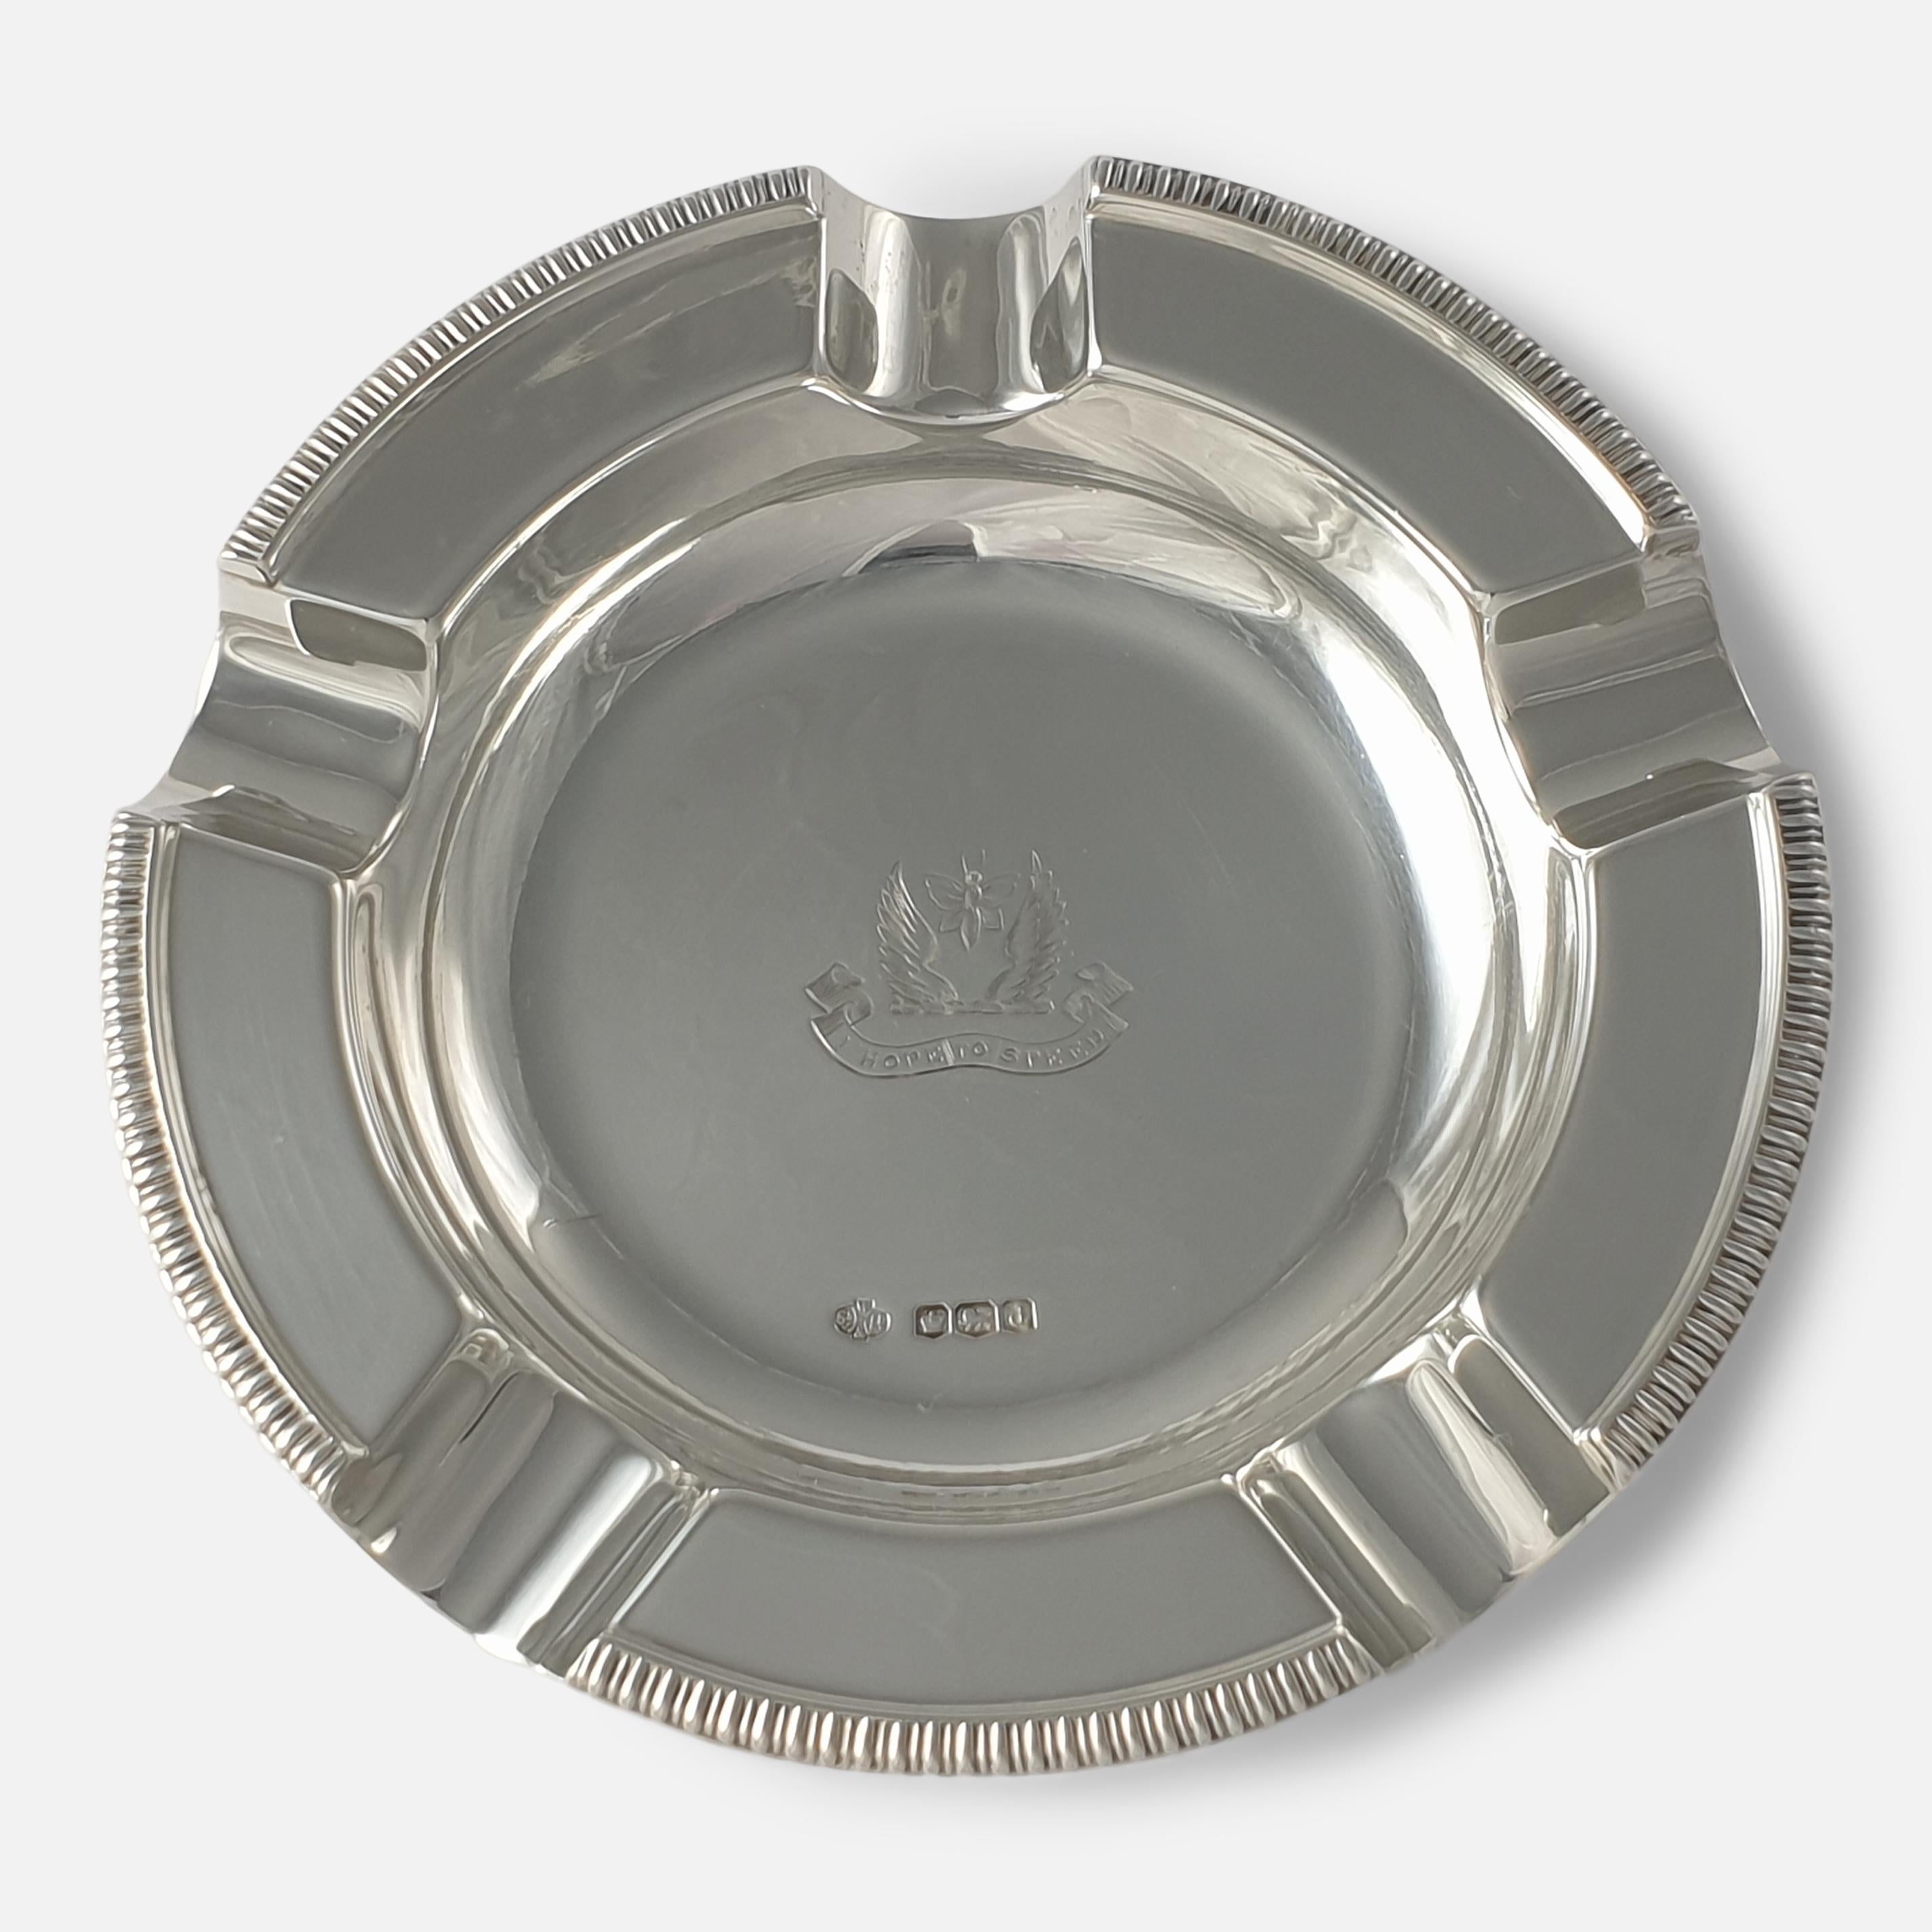 Pair of Sterling Silver Crested Ashtrays, William Hutton & Sons For Sale 4